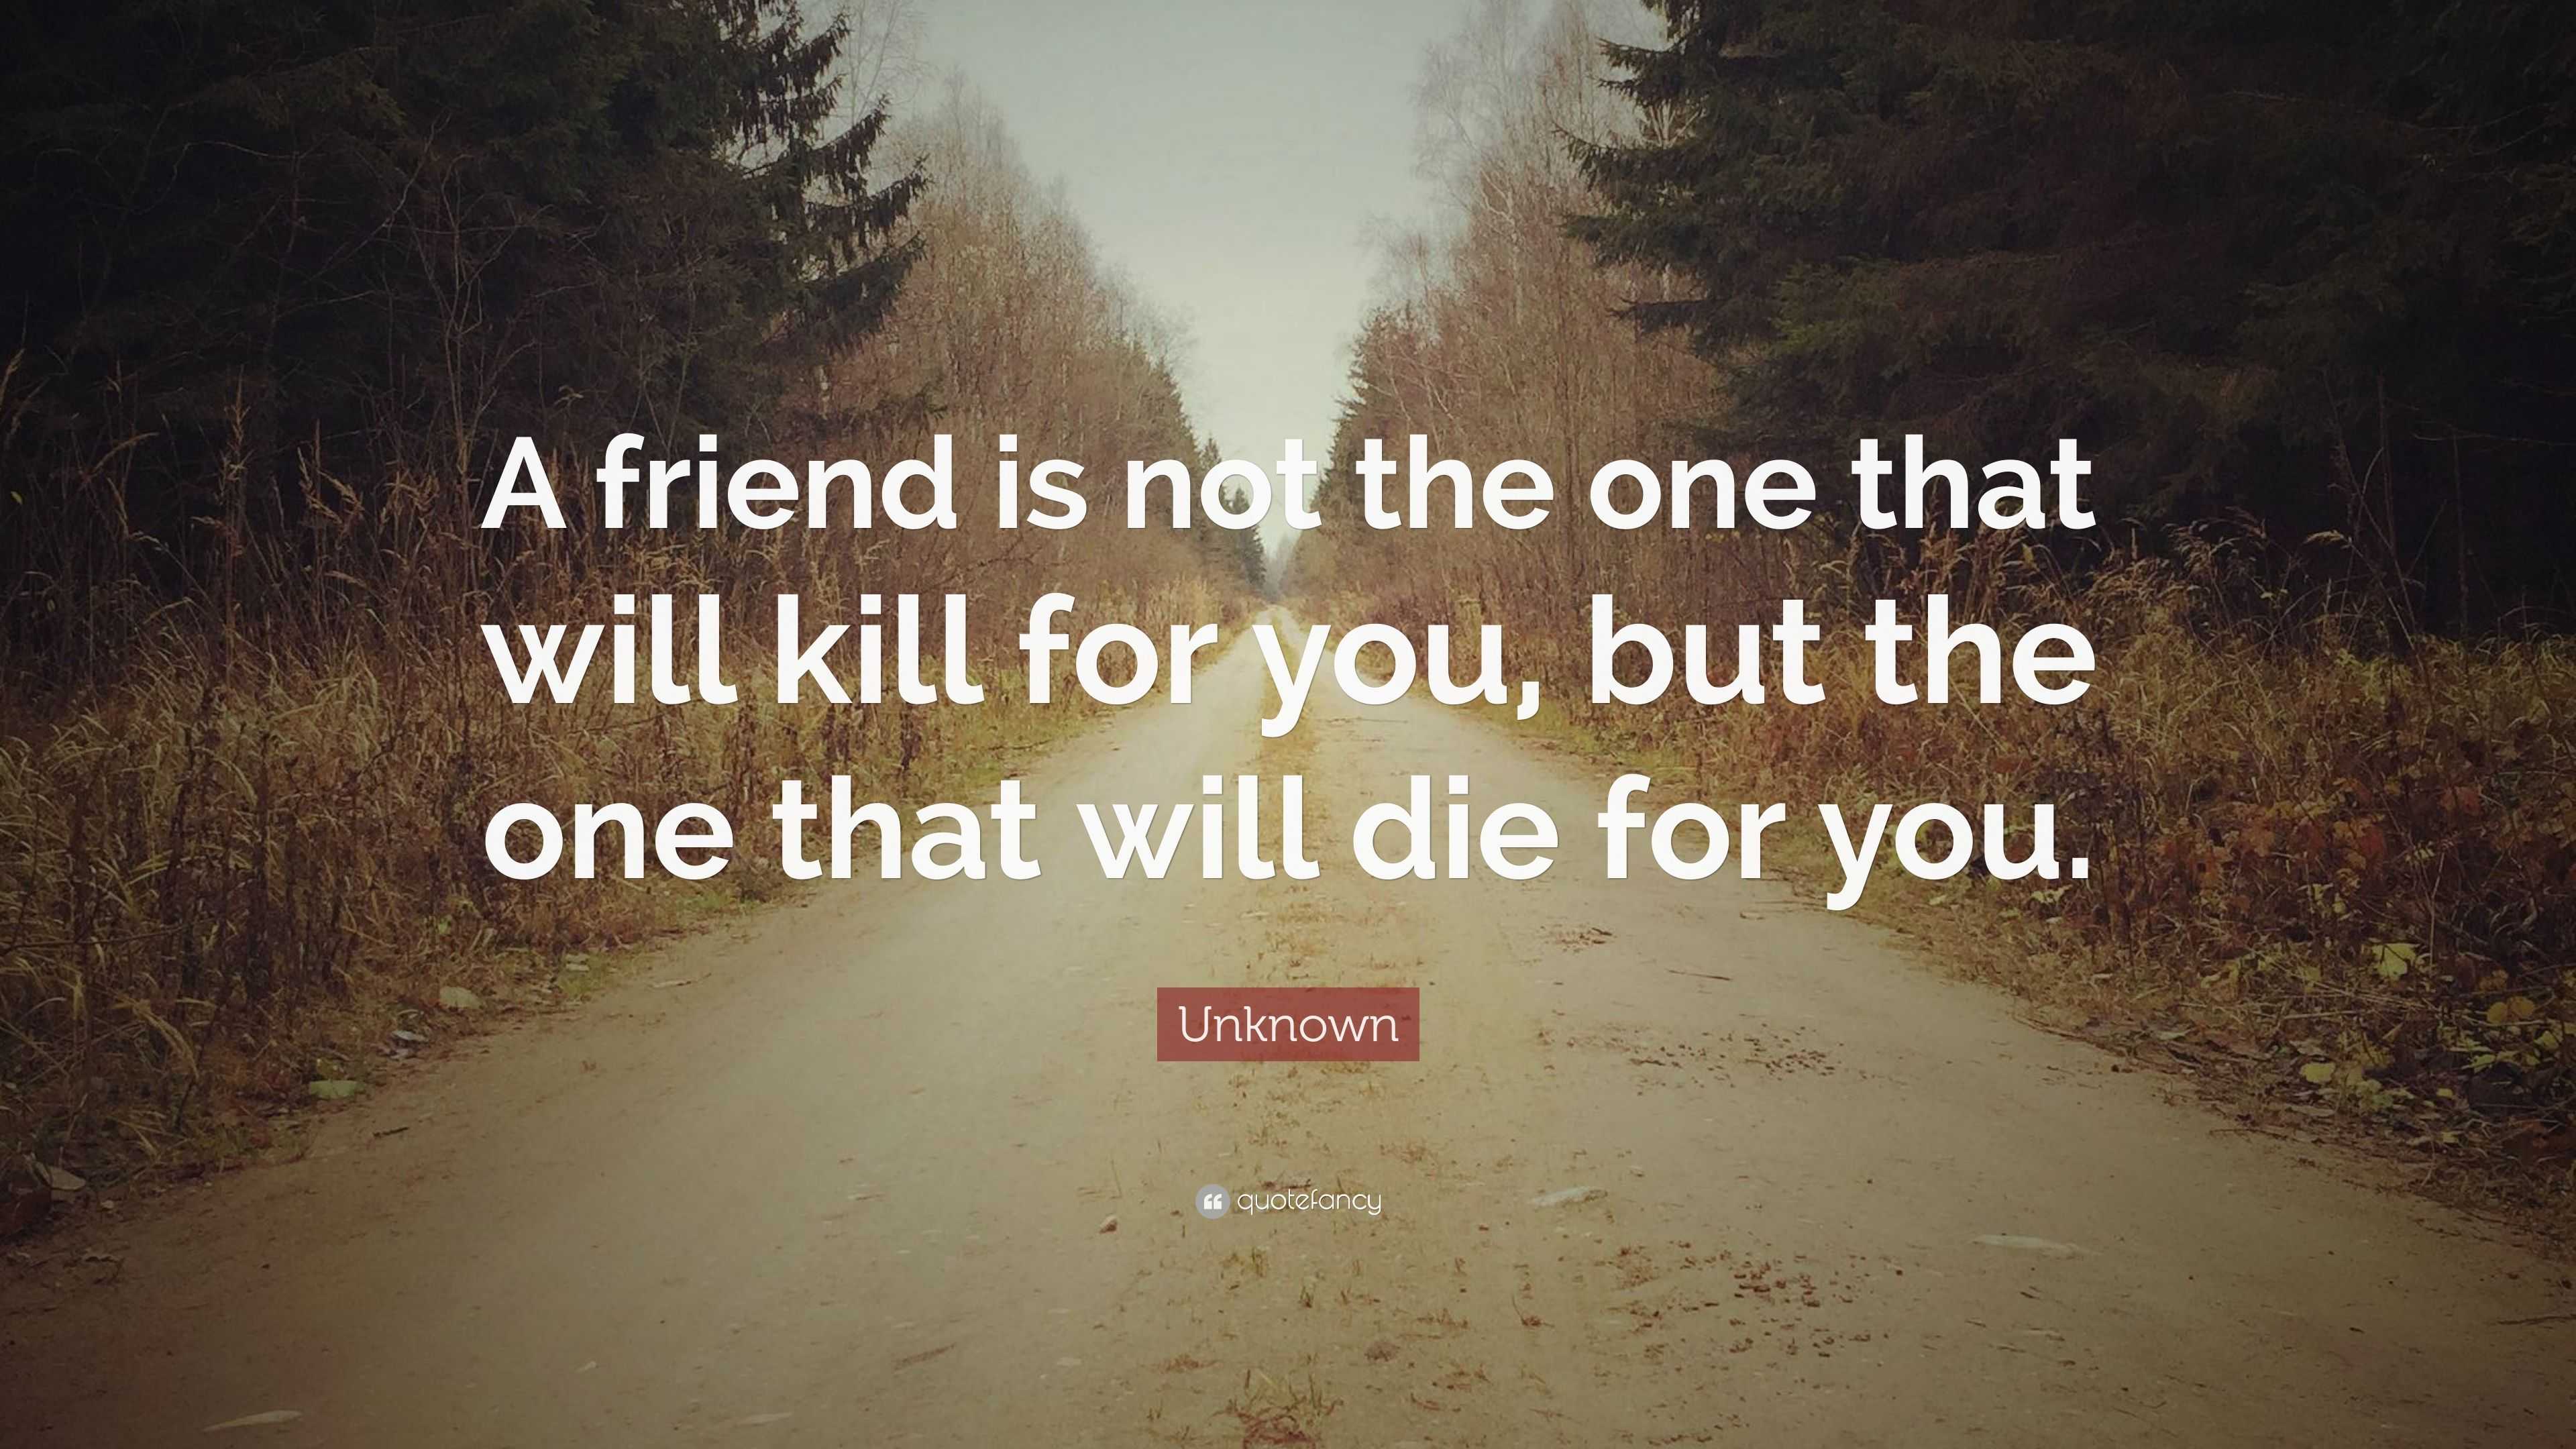 Unknown Quote: “A friend is not the one that will kill for you, but the